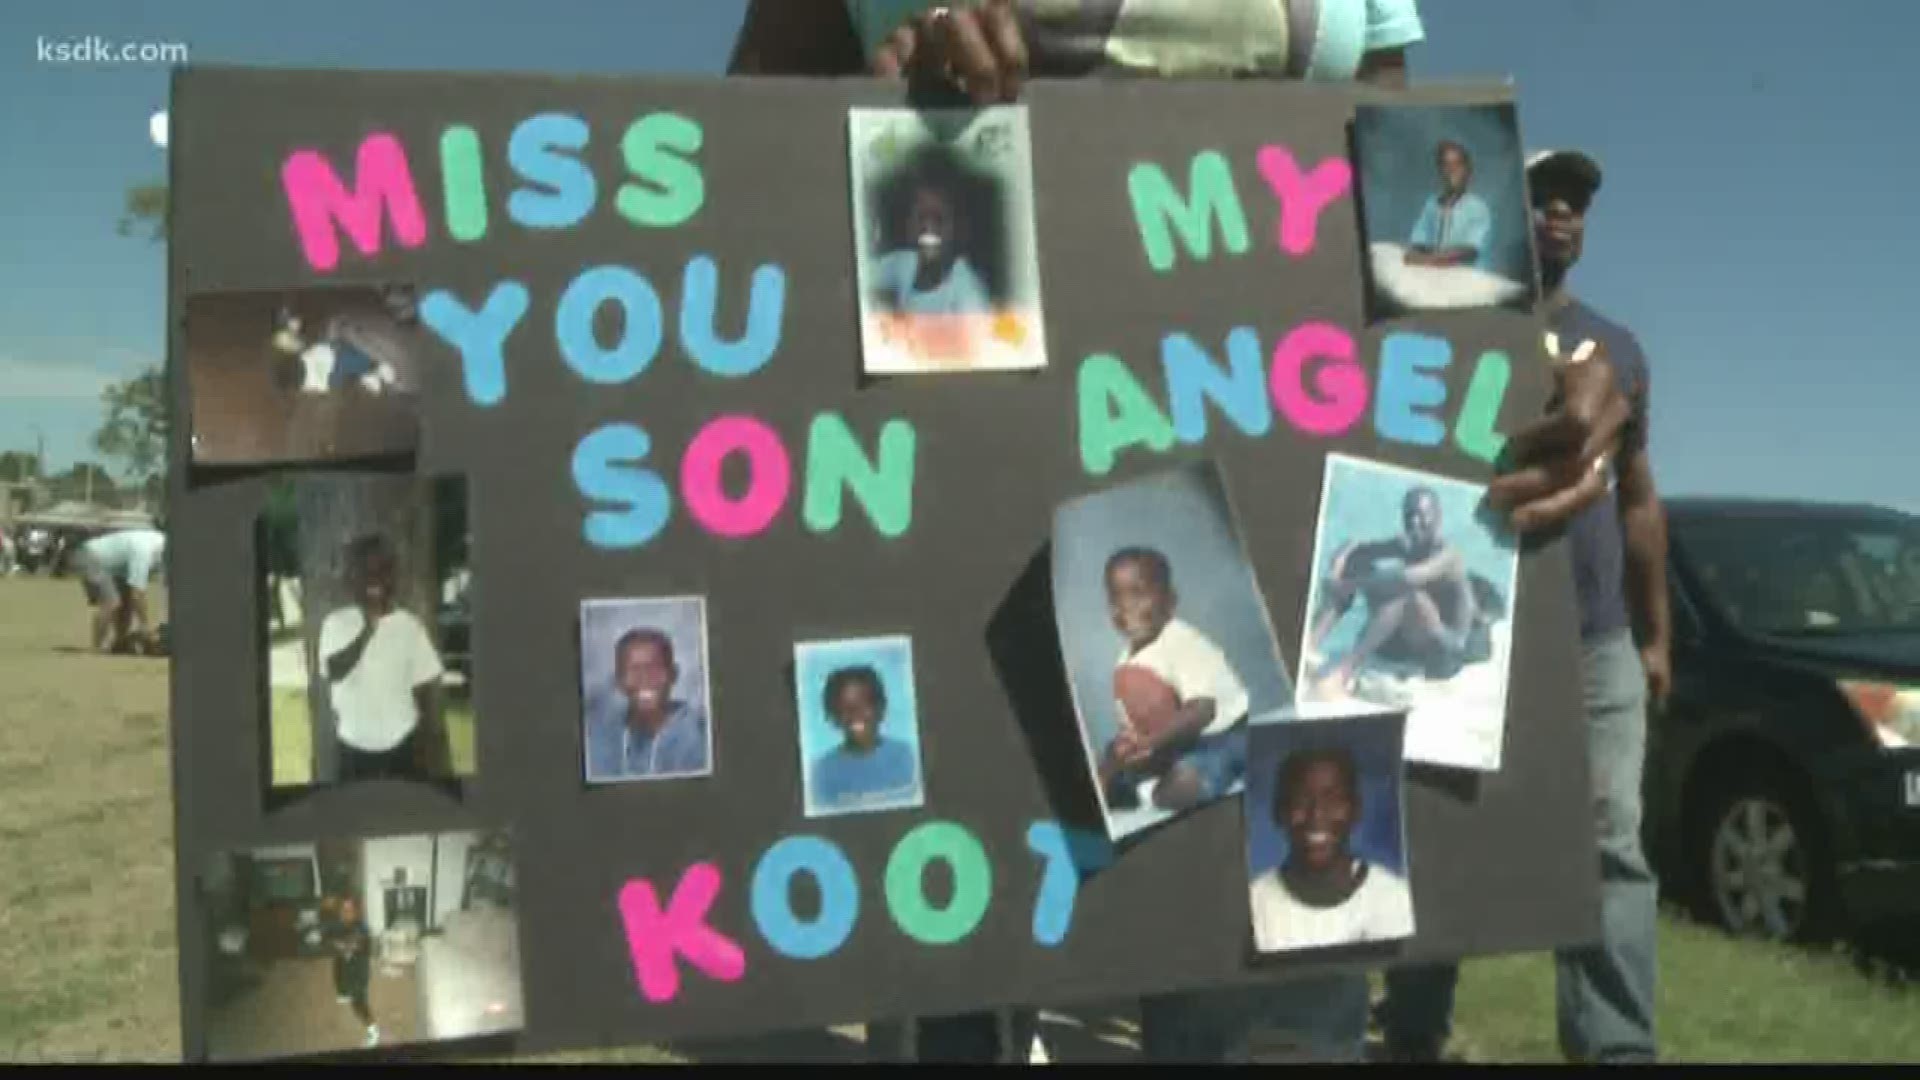 It happens in a year where 23 children have been shot and killed in the St. Louis area.